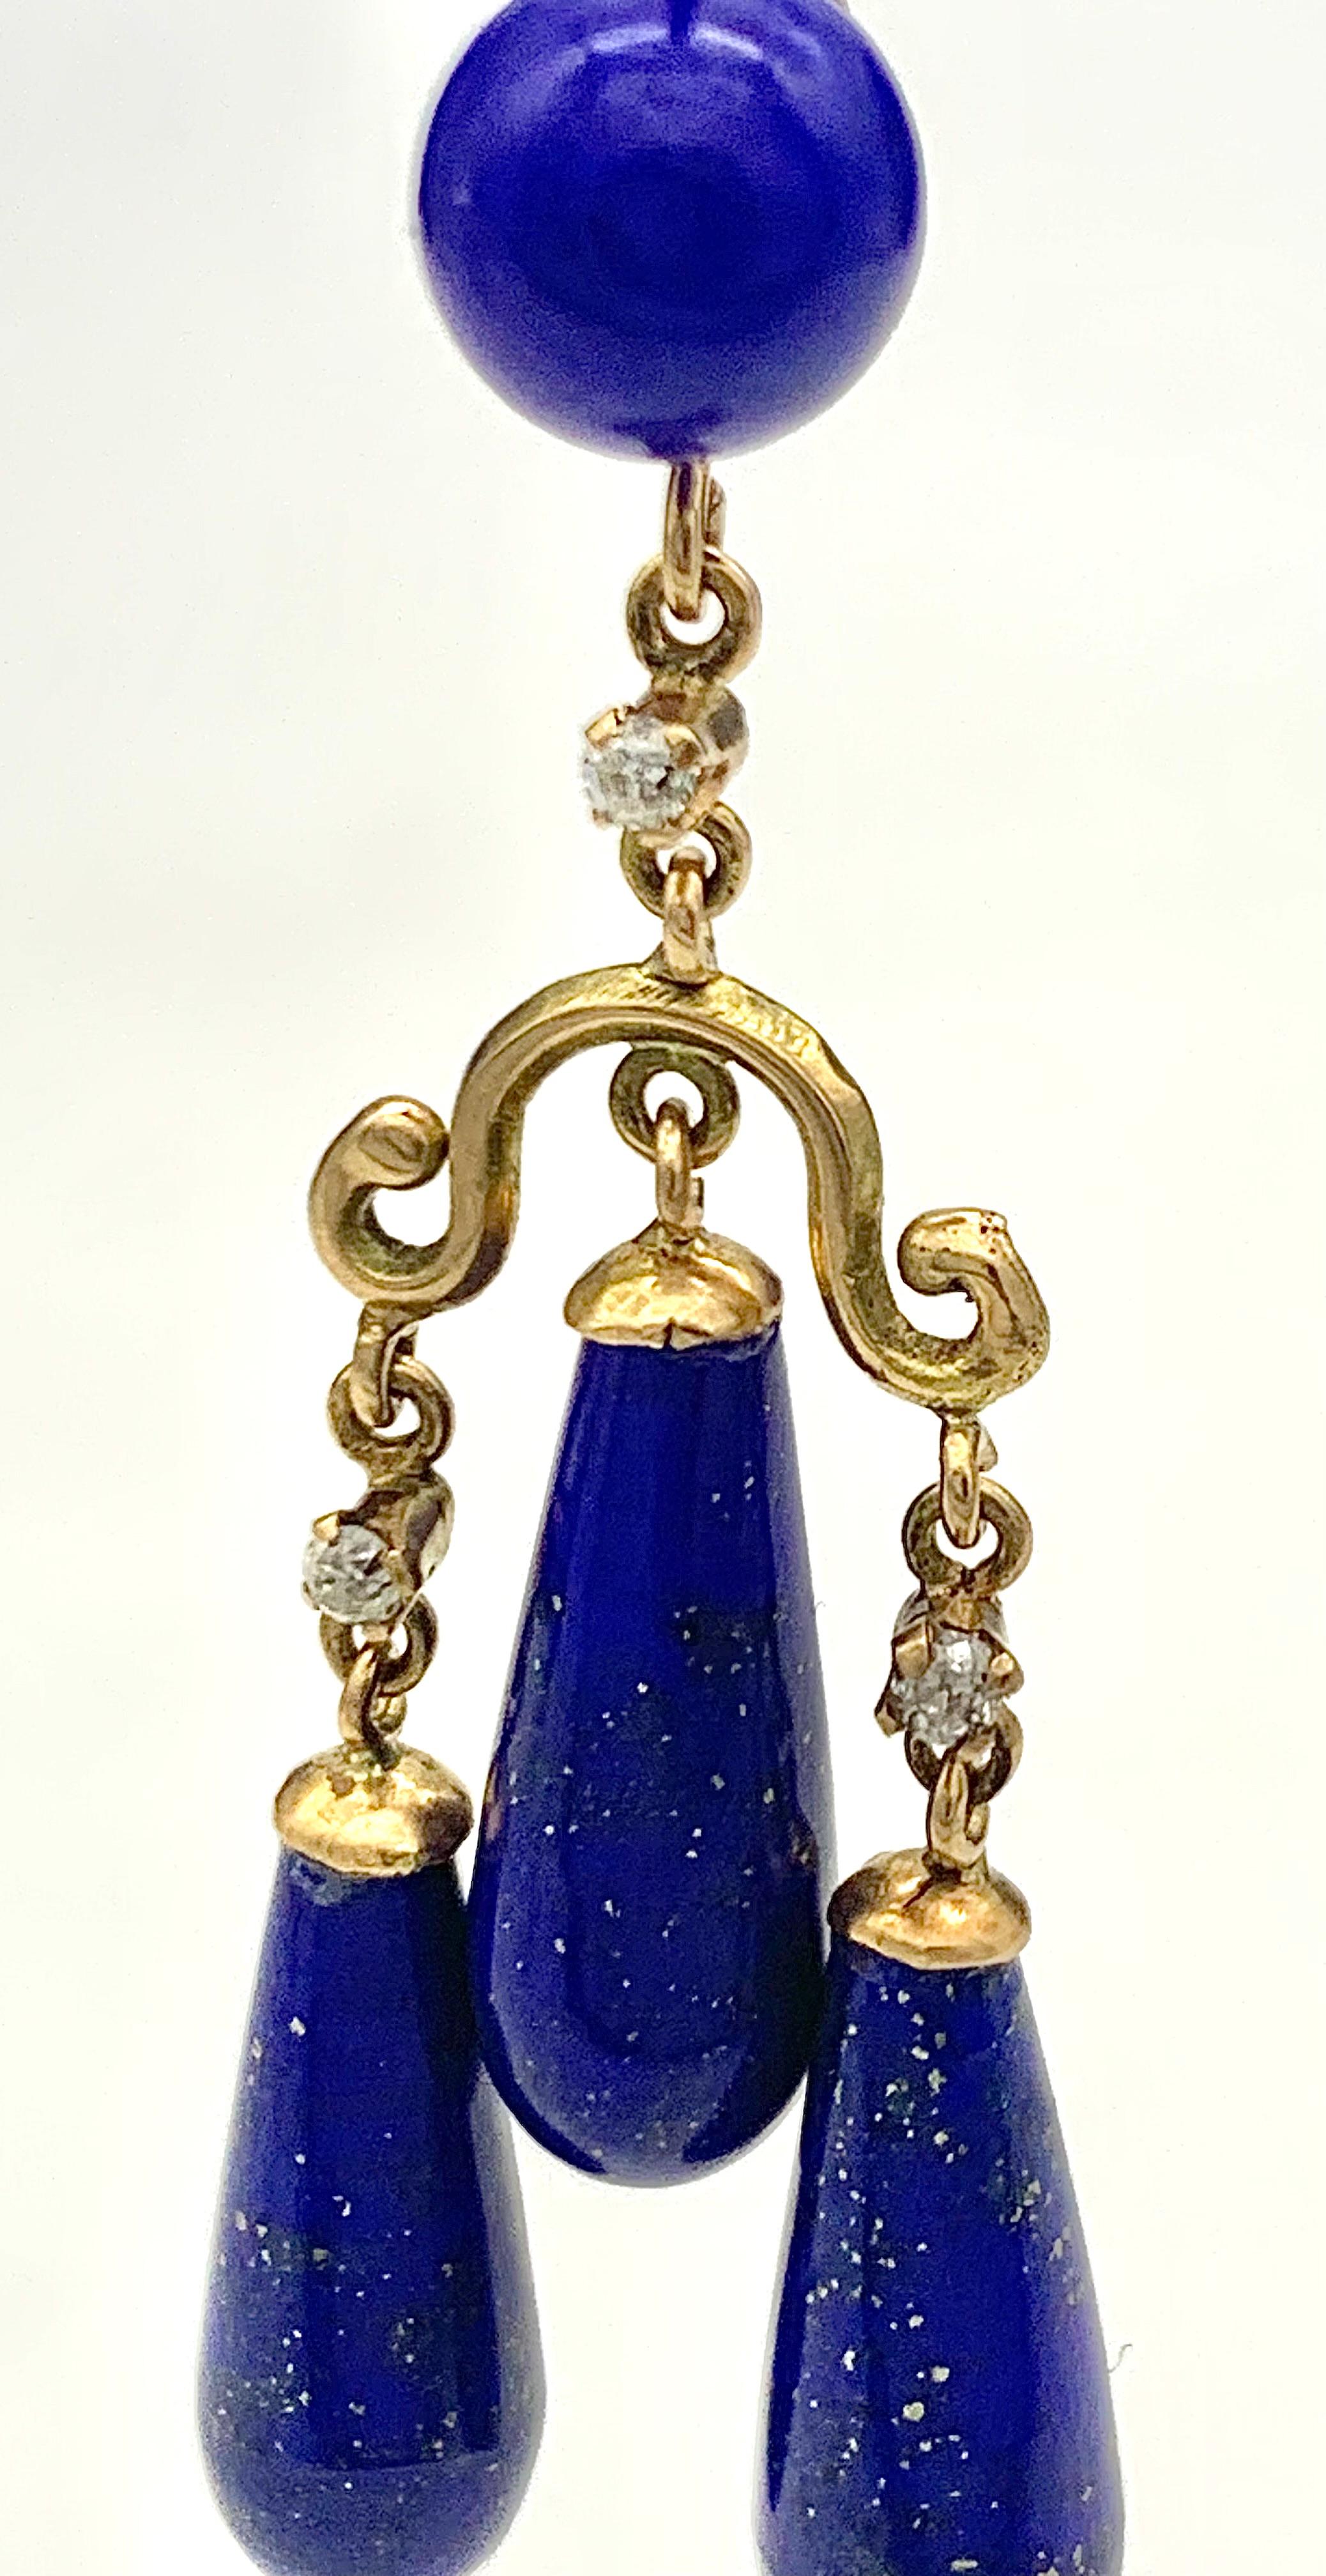 These elegant dangling earrings were made out of 14 karat gold in 1870 ca. The earrings are in designed in Greek revival taste. The earrings consists of tops set with a lapis lazuli bead with  hooks that come with a safety device. From a short